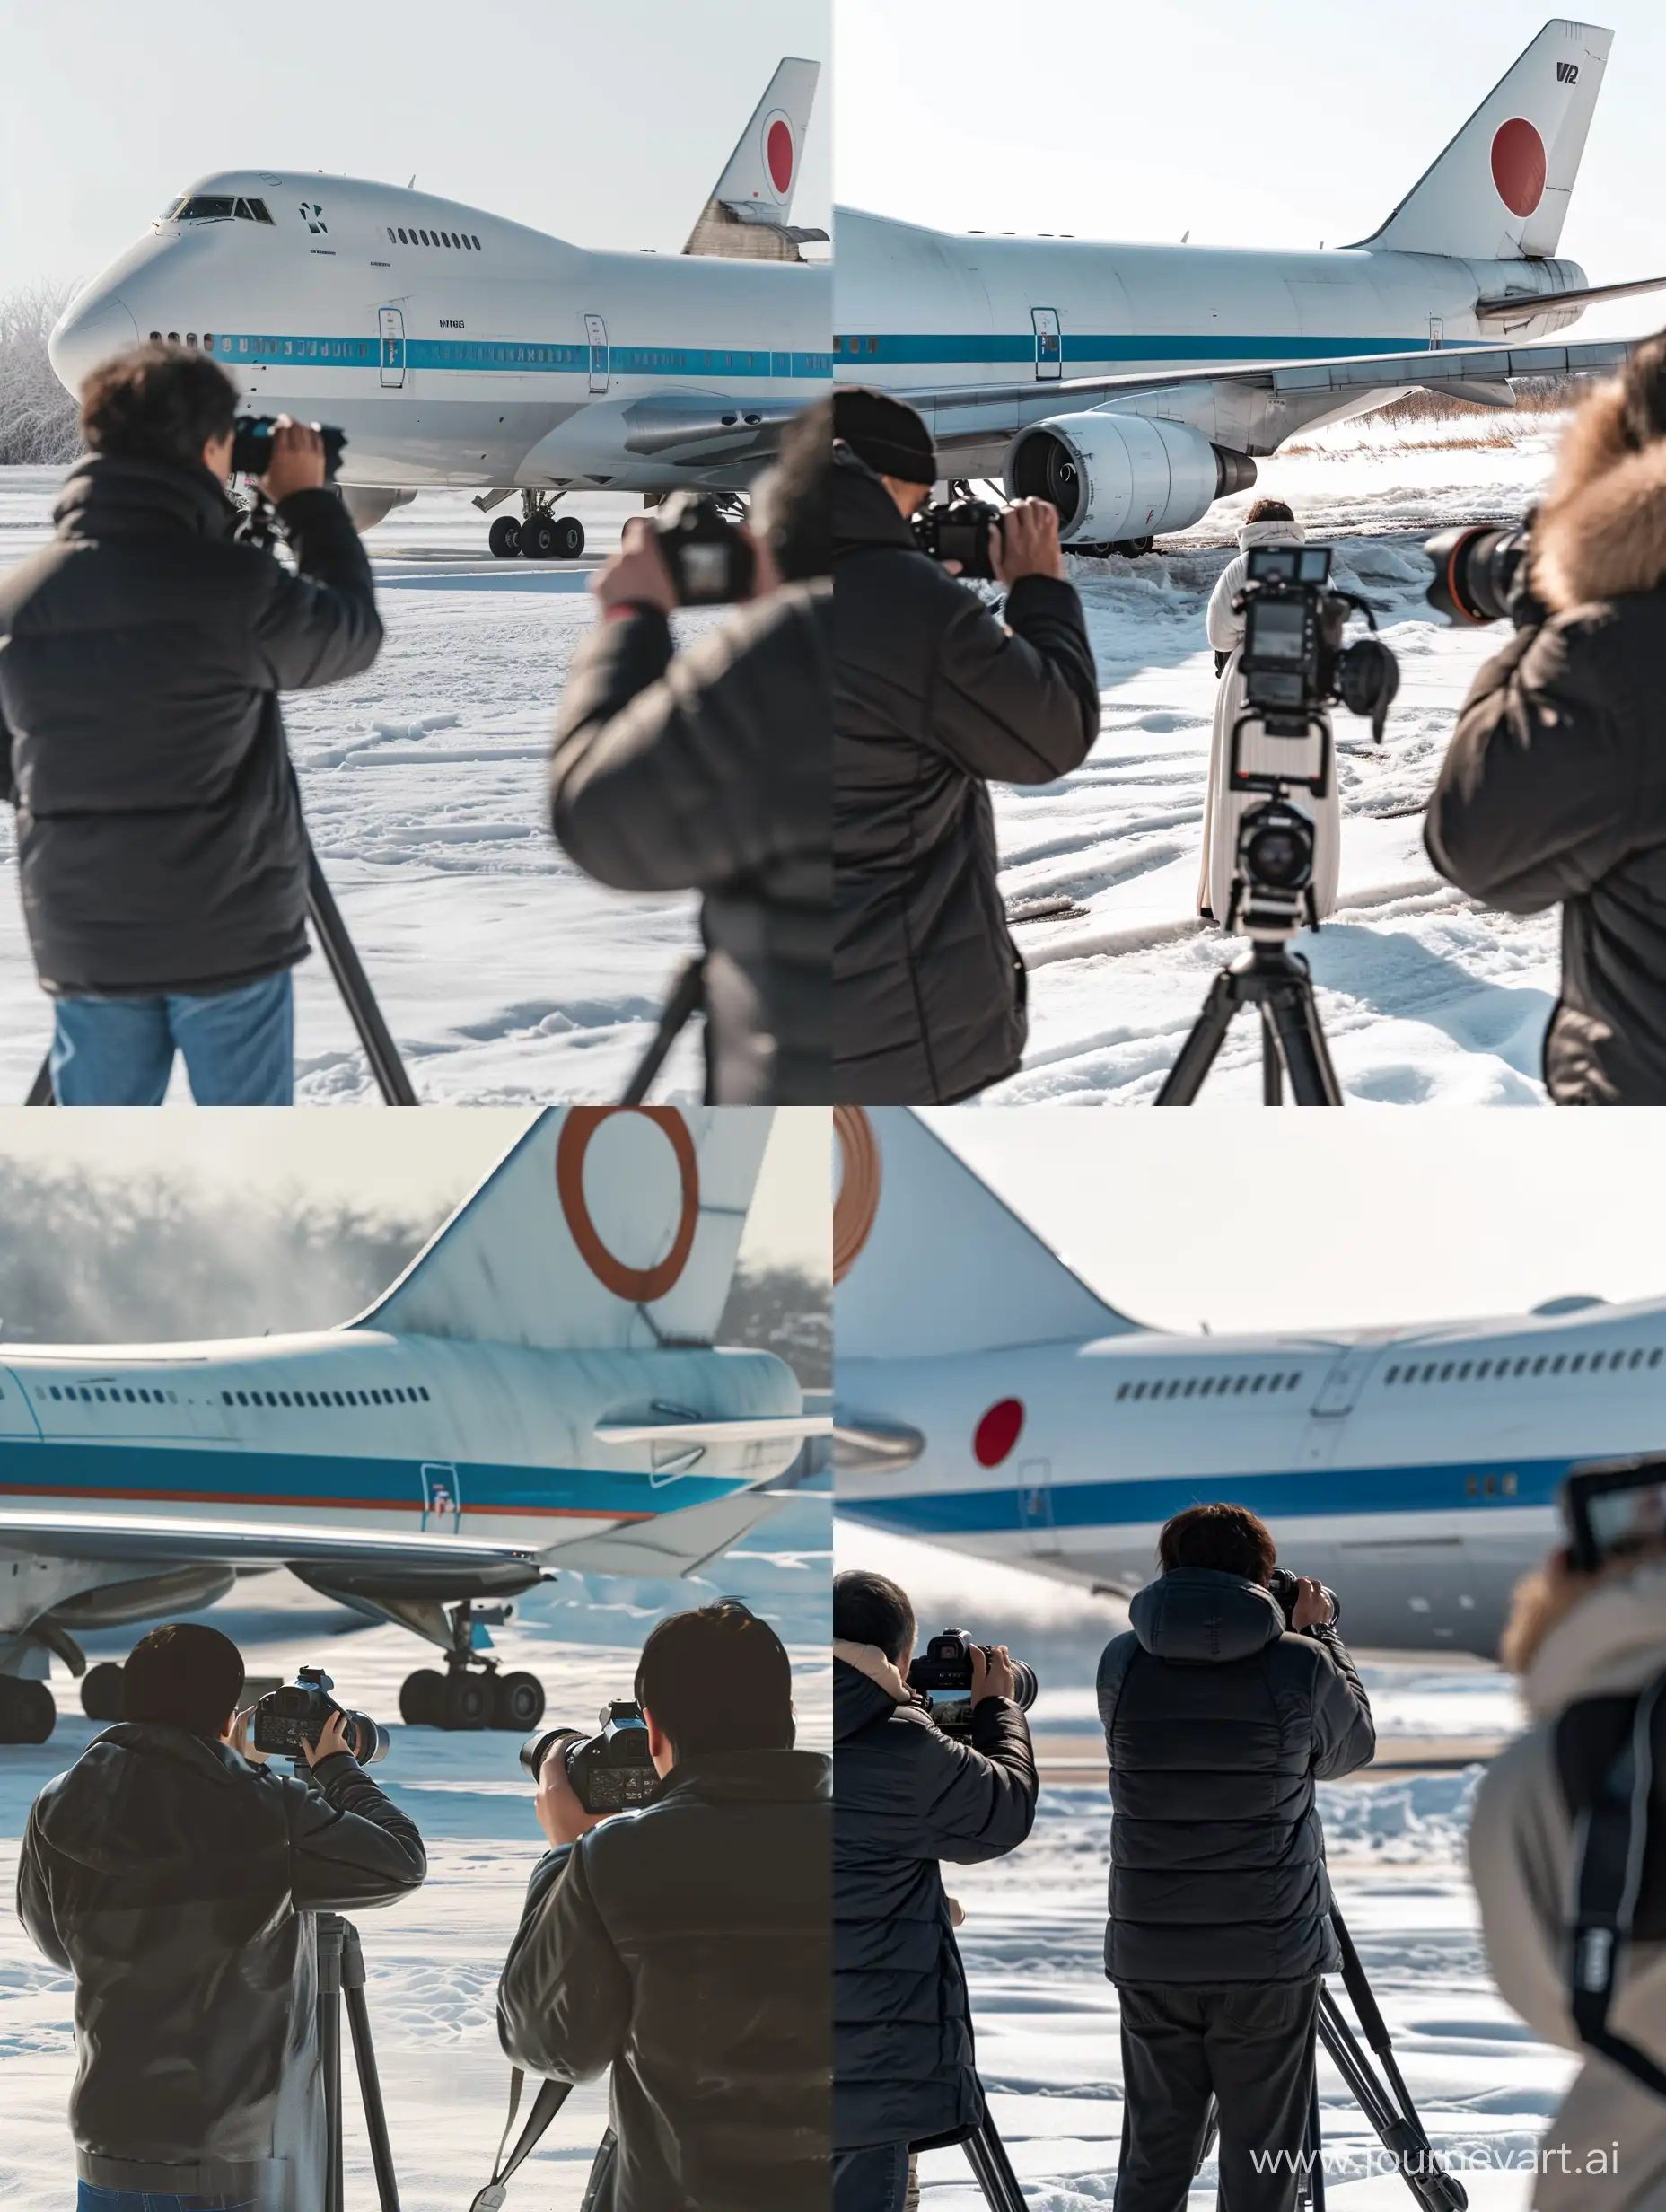 The view from the back. In the image, two people with cameras take pictures of a Boeing 747 plane. One man is wearing a black jacket, the other a white and long one. The aircraft has a blue stripe along the fuselage, it is white in color, and a red circle on the tail. The weather is sunny, it is freezing and there is snow. Extra detailed, very realistic —v 6